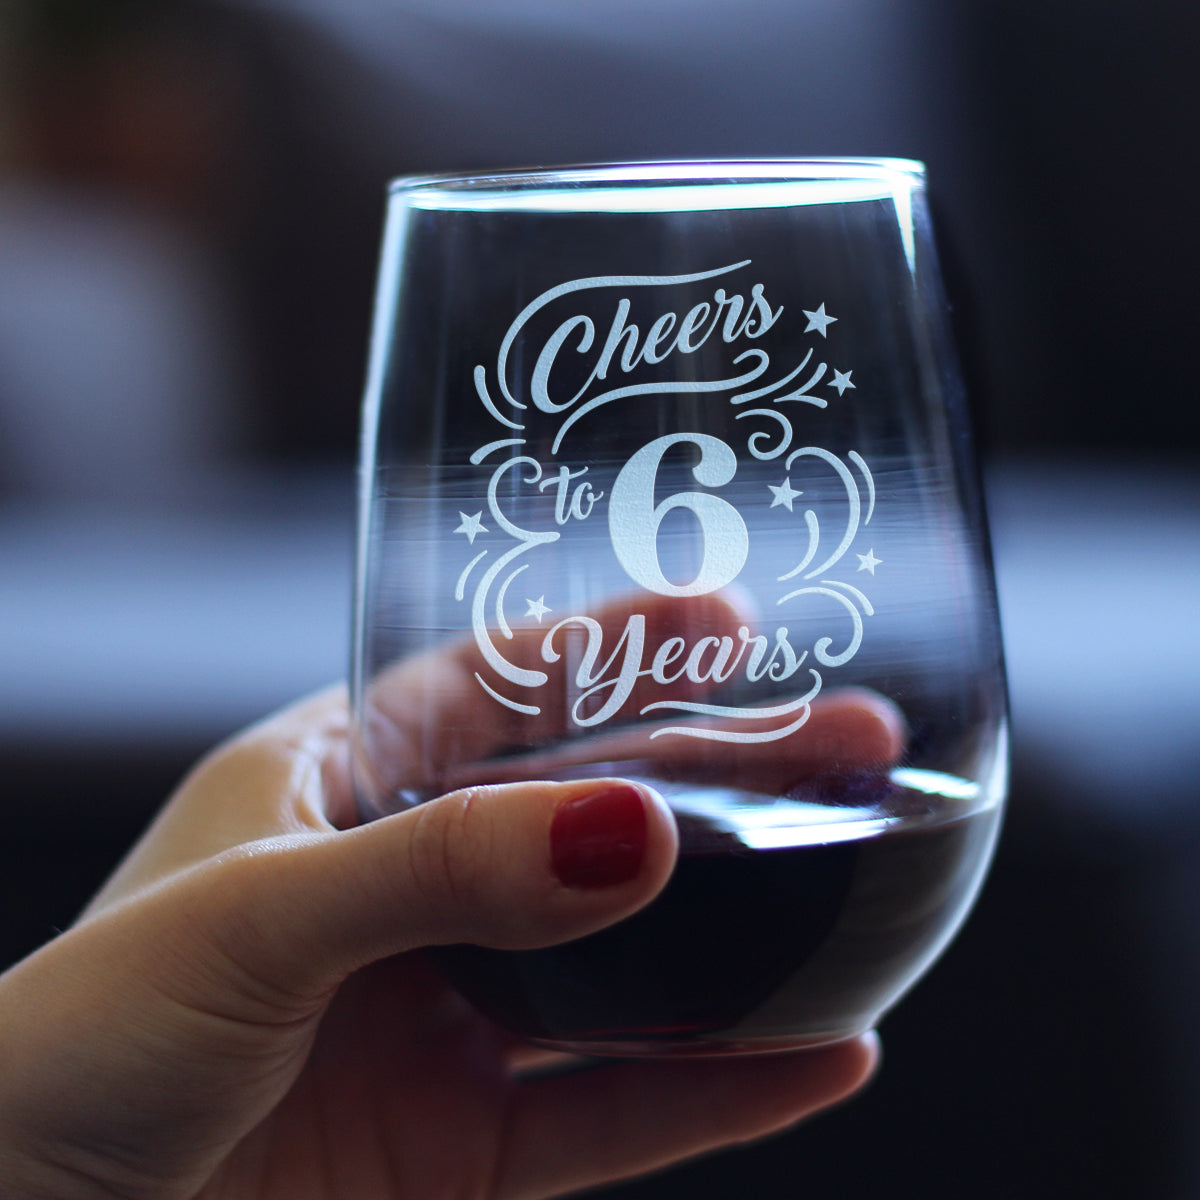 Cheers to 6 Years - Stemless Wine Glass Gifts for Women &amp; Men - 6th Anniversary Party Decor - Large 17 Oz Glasses